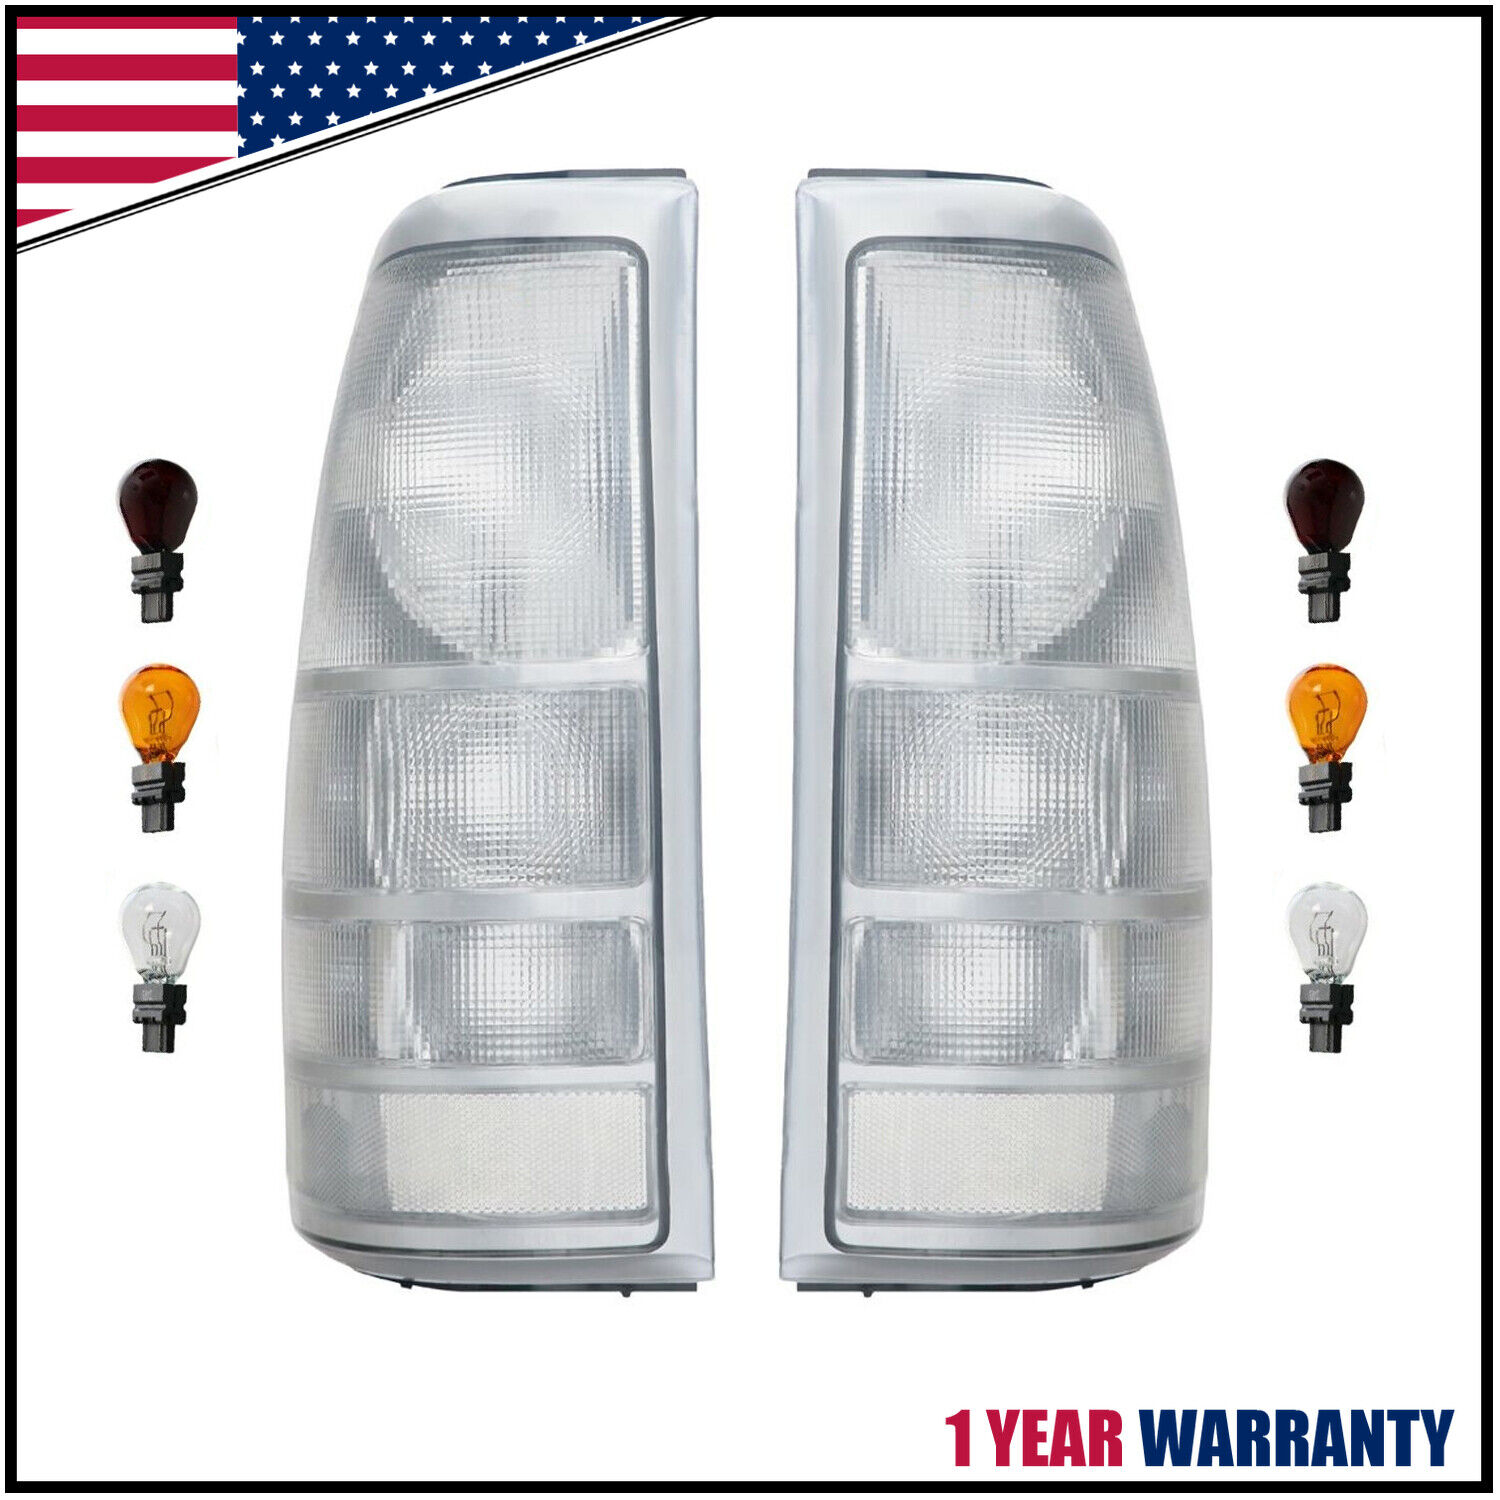 RARE All Clear Euro Rear Tail Light Set For 99-02 Chevy Silverado Pickup Truck